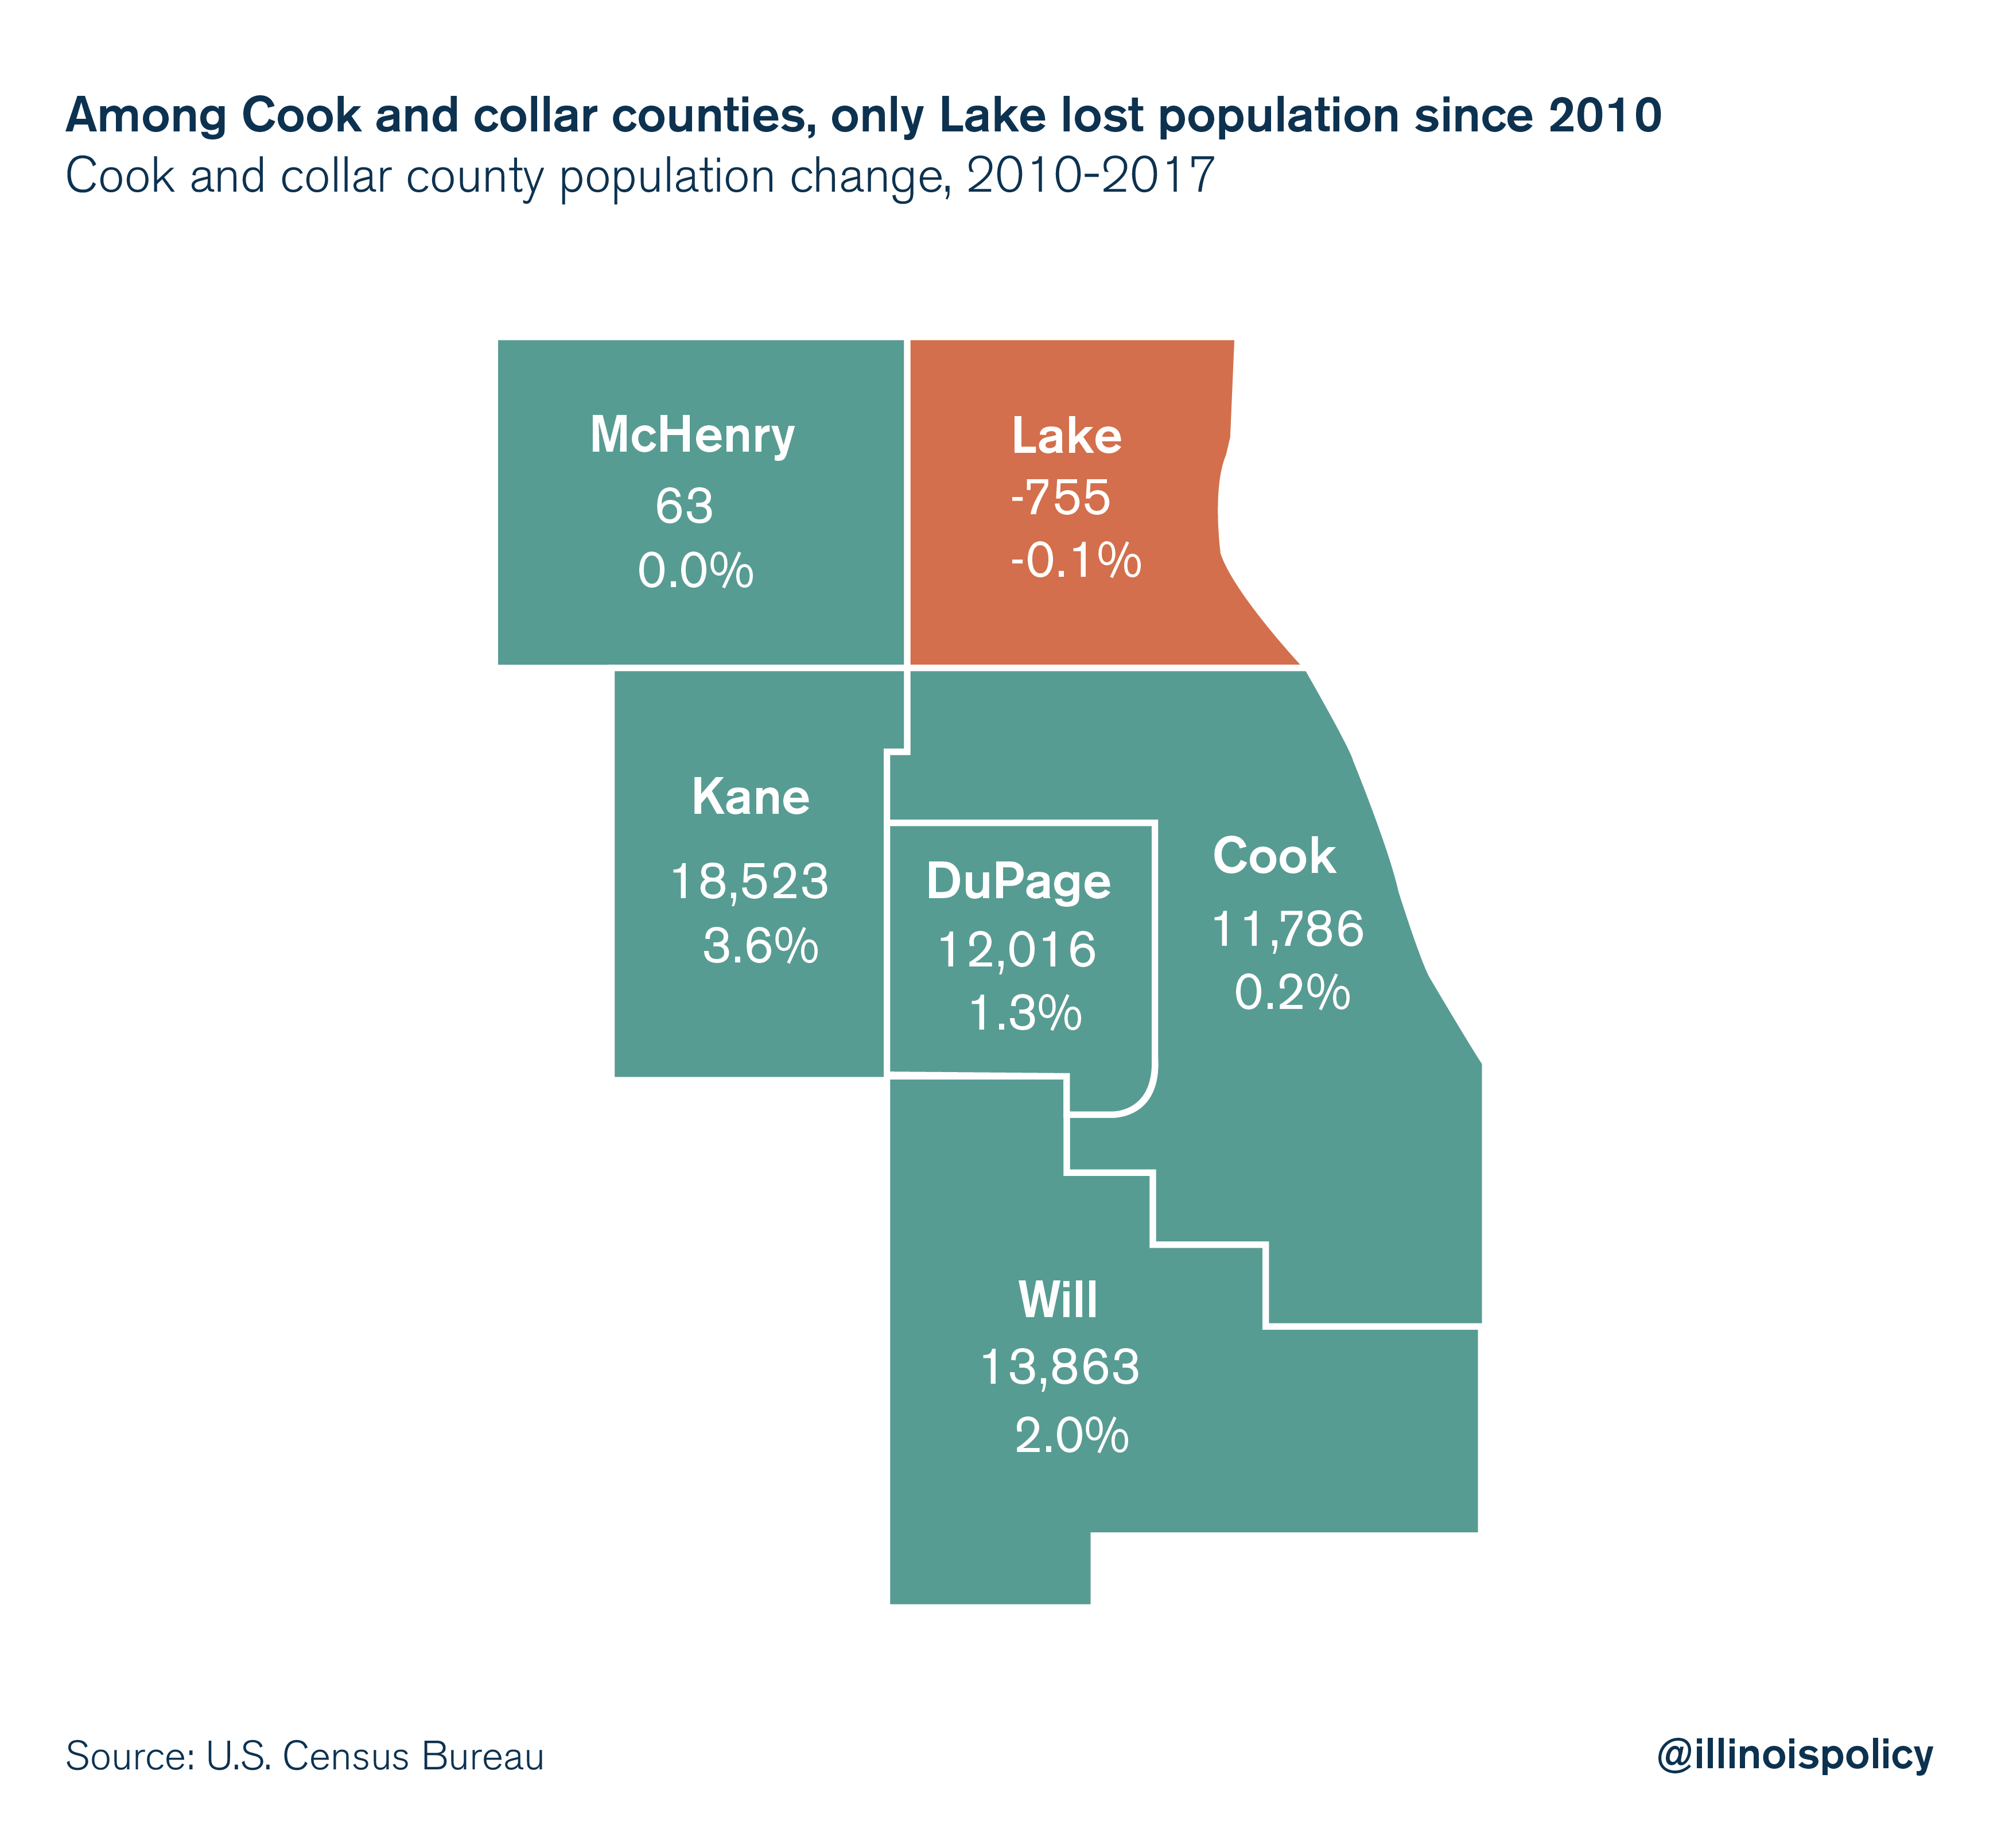 Among Cook and collar counties, only Lake lost population since 2010